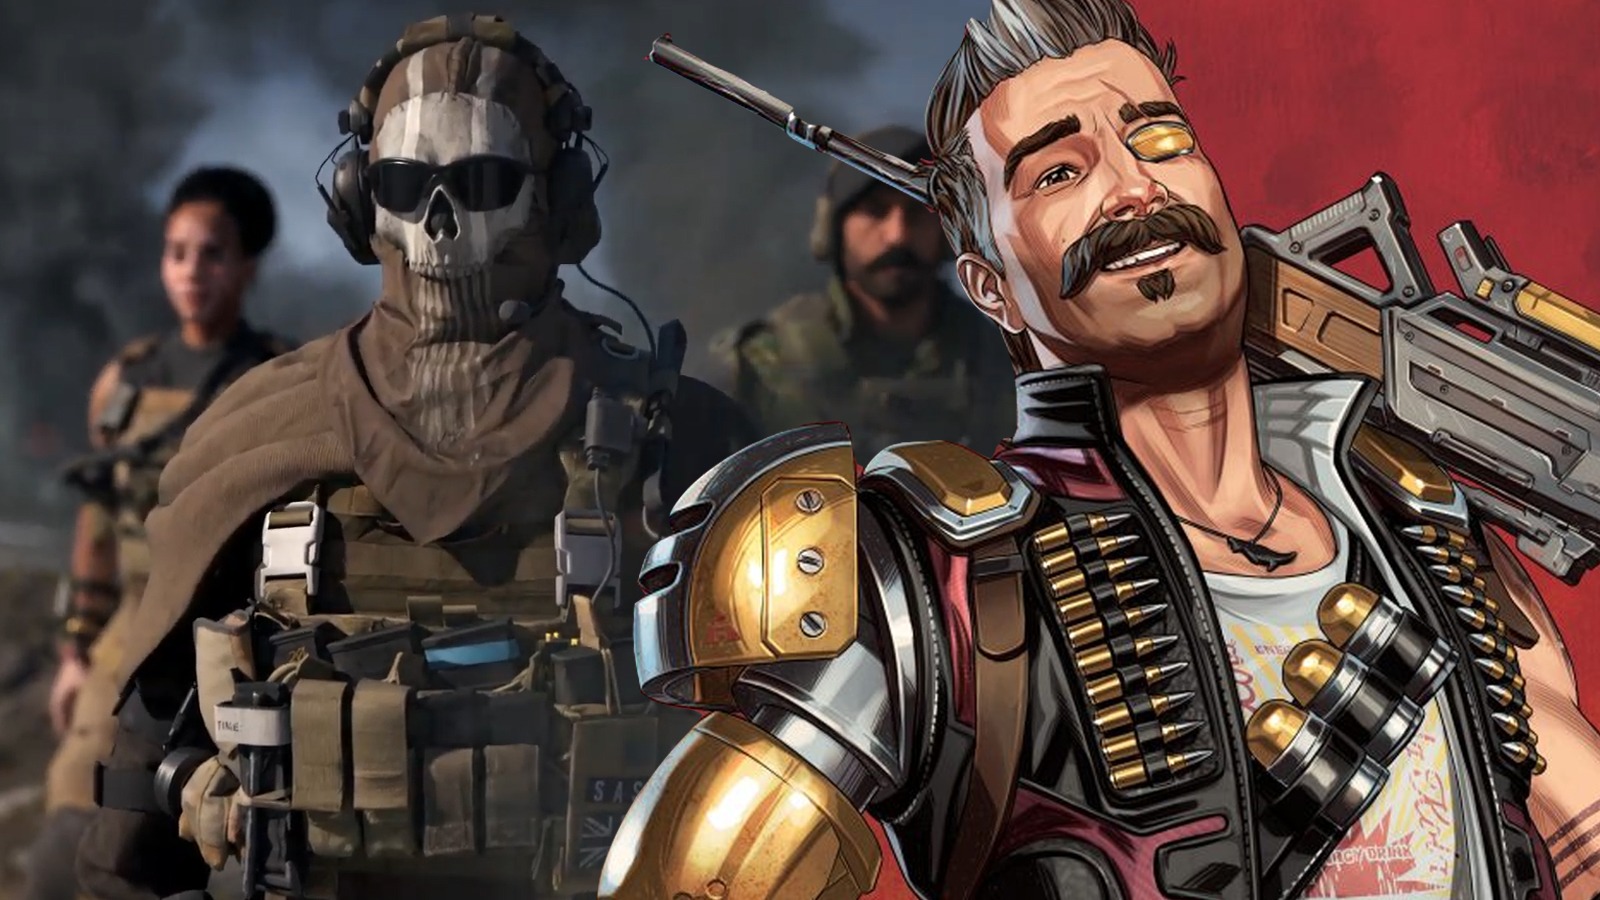 Apex Legends players claim Warzone 2.0 made them “respect” Apex more